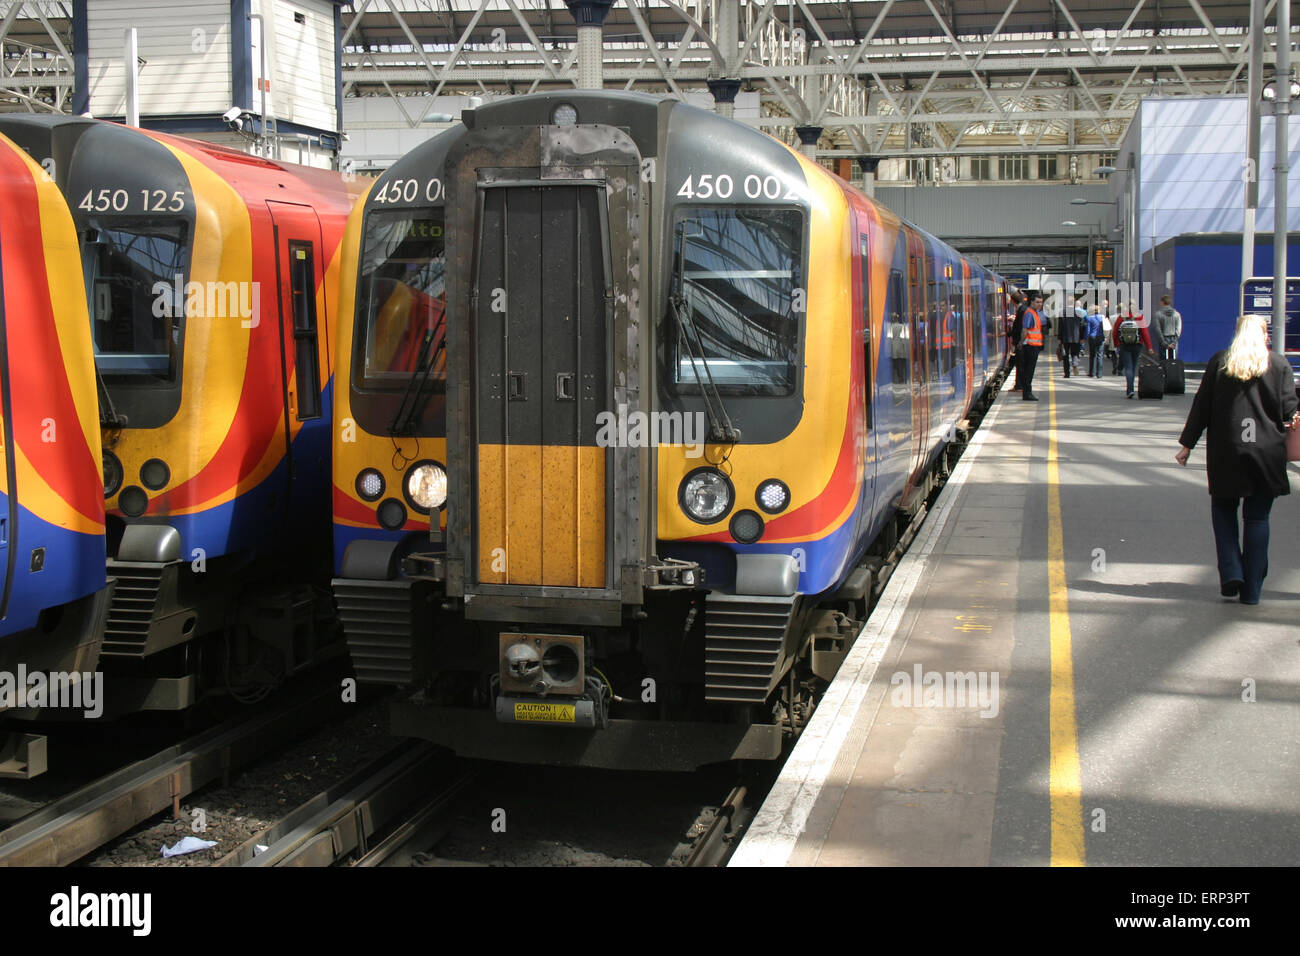 SOUTH EAST SOUTHEASTERN TRAINS Stock Photo